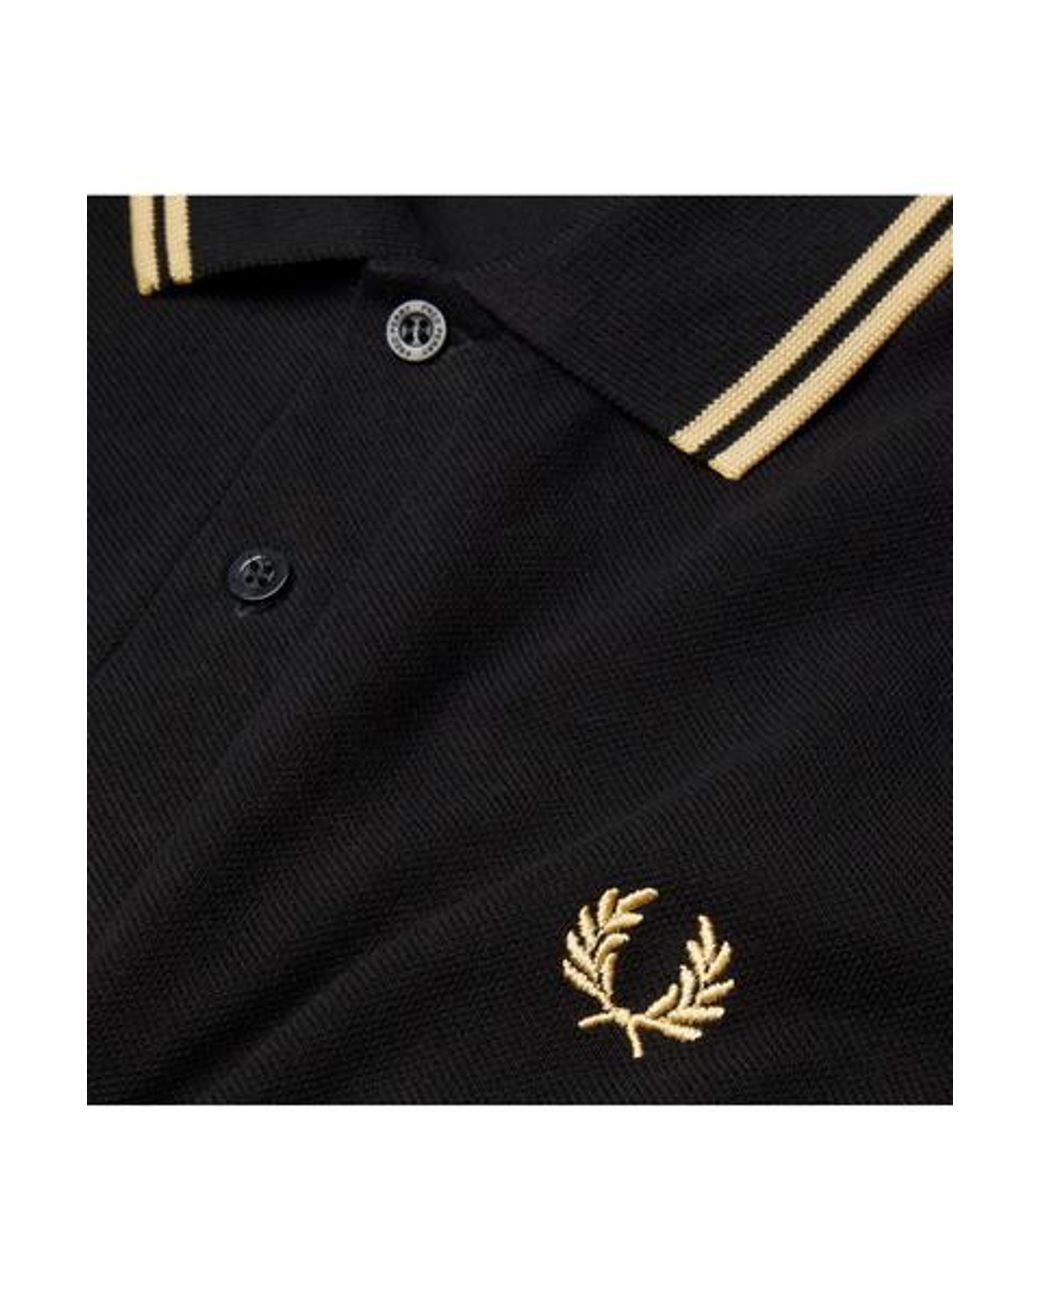 Fred Perry Cotton Black Champagne Twin Tipped M 12 Polo Shirt for Men -  Save 6% - Lyst